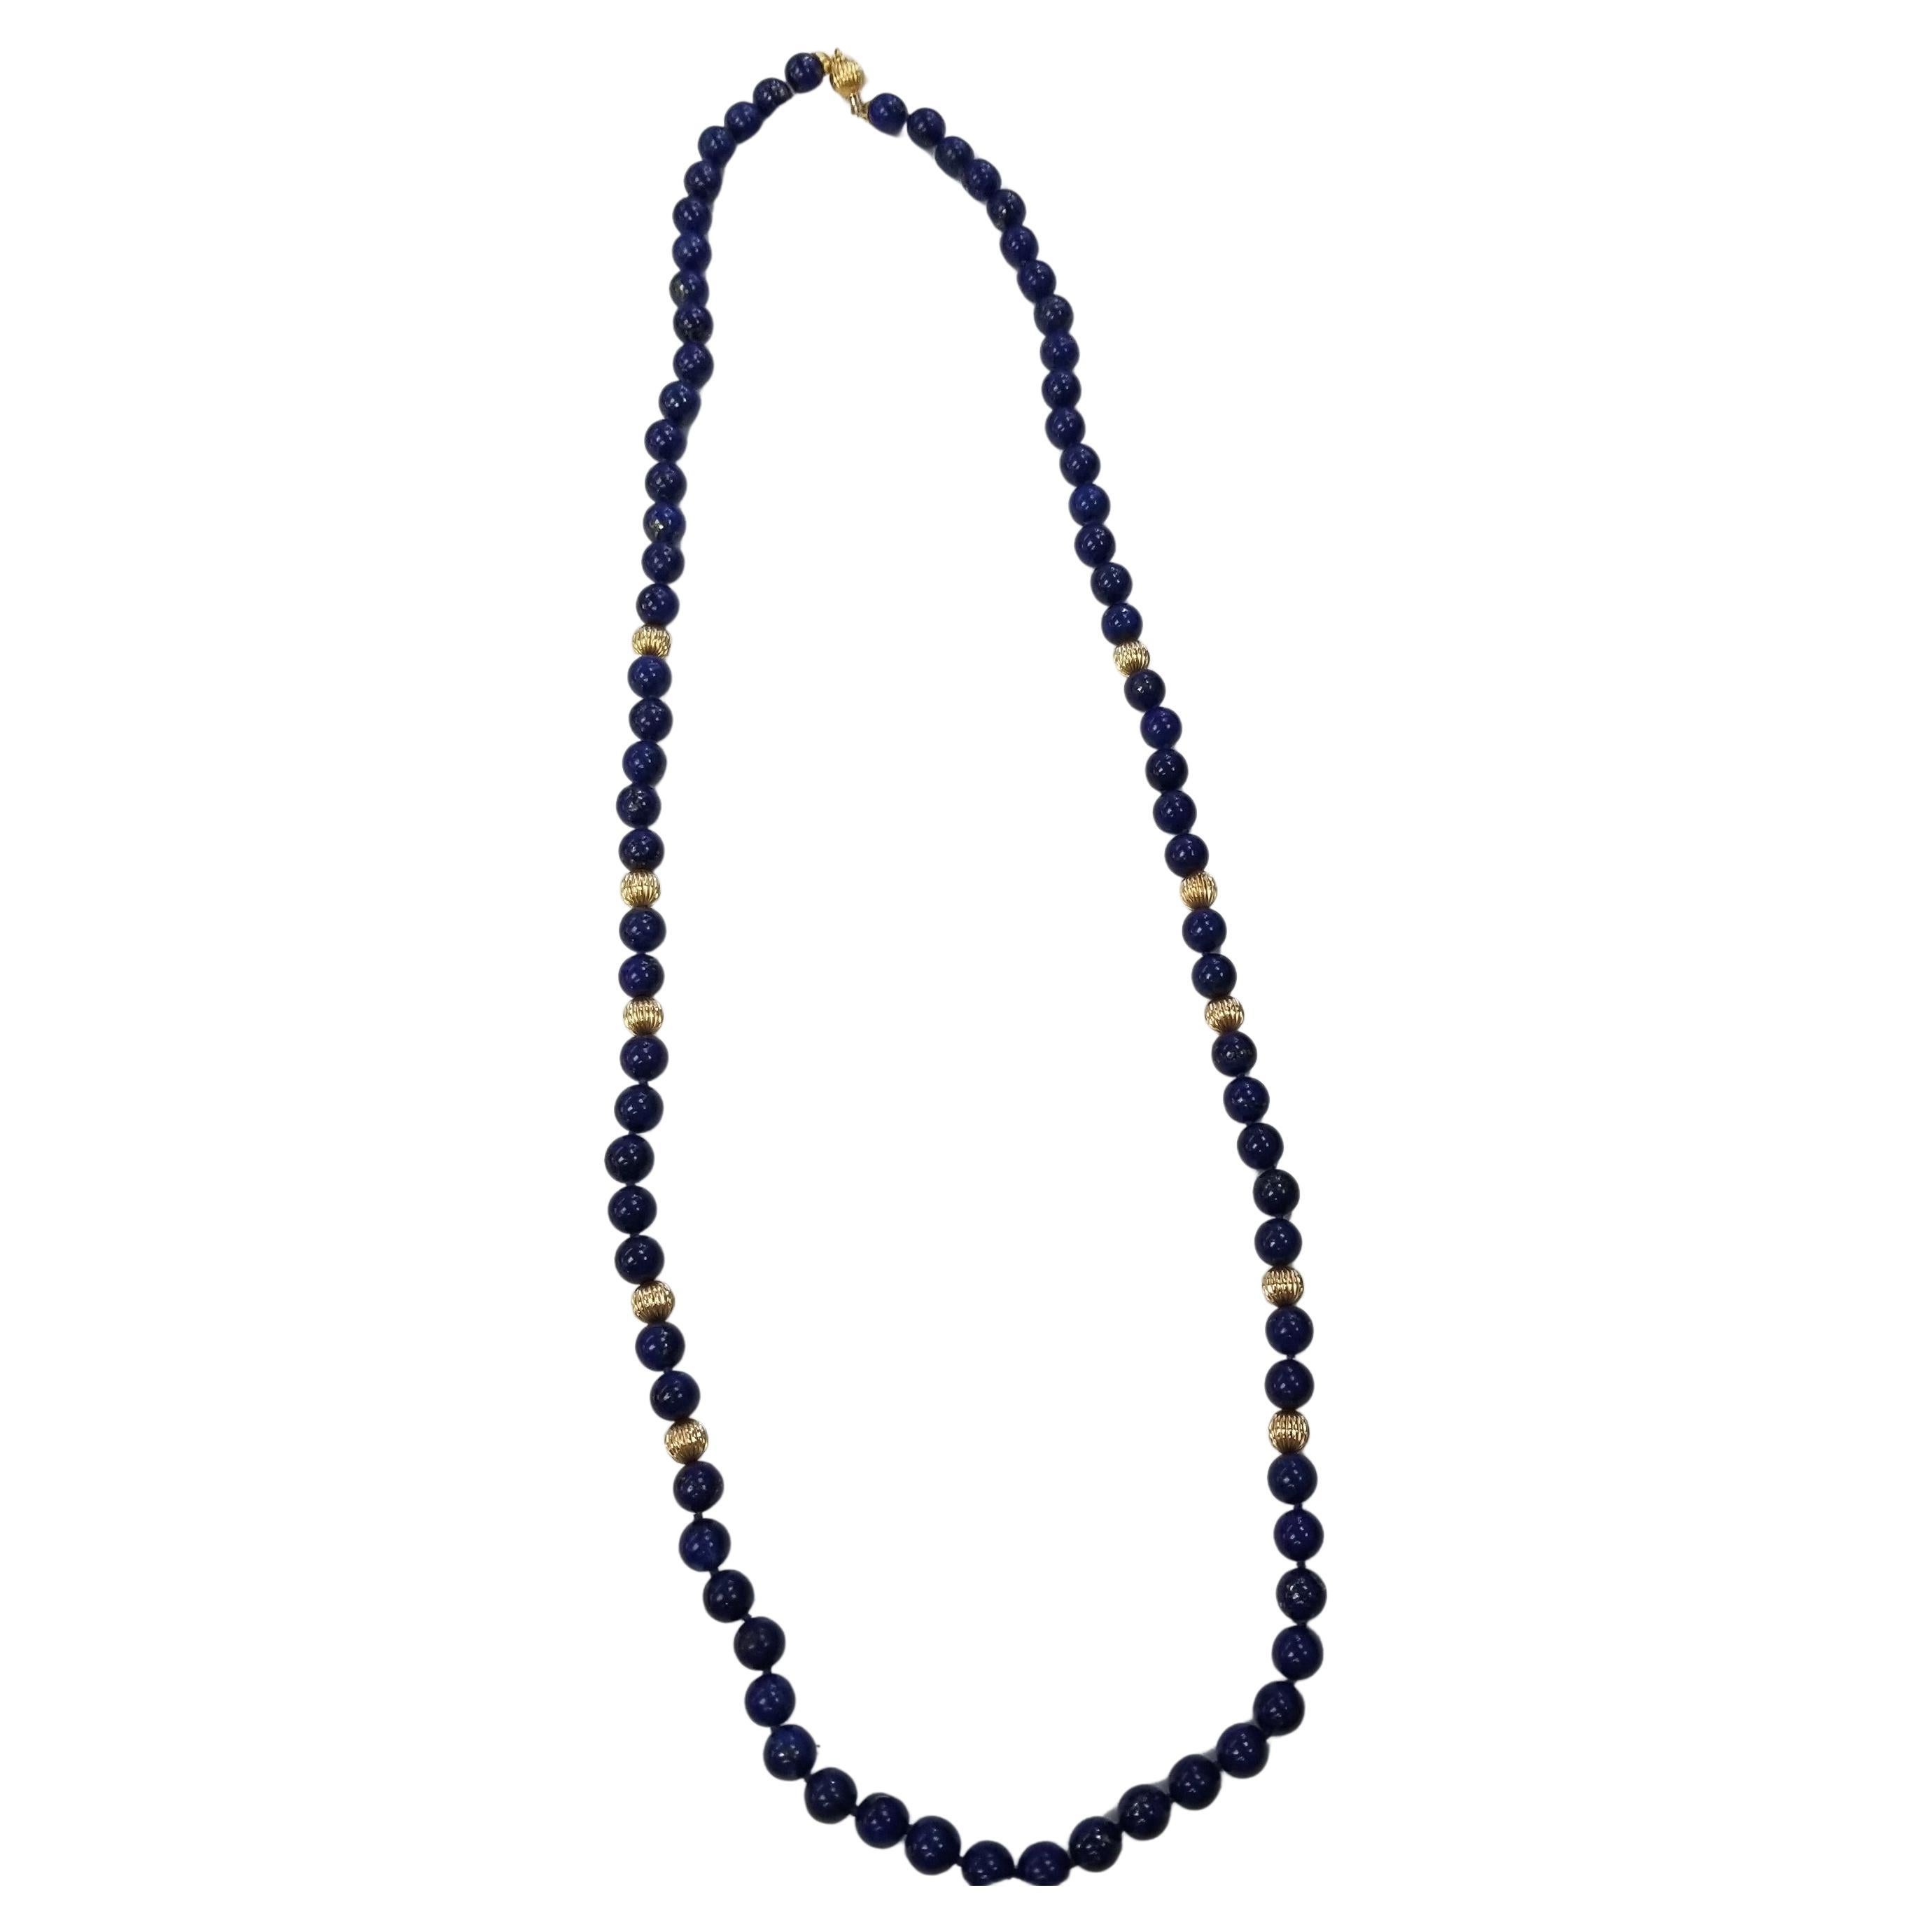 Lapis Lazuli 9.5 - 10mm Beads with 14k yellow gold Rondelle Necklace 36 inches For Sale